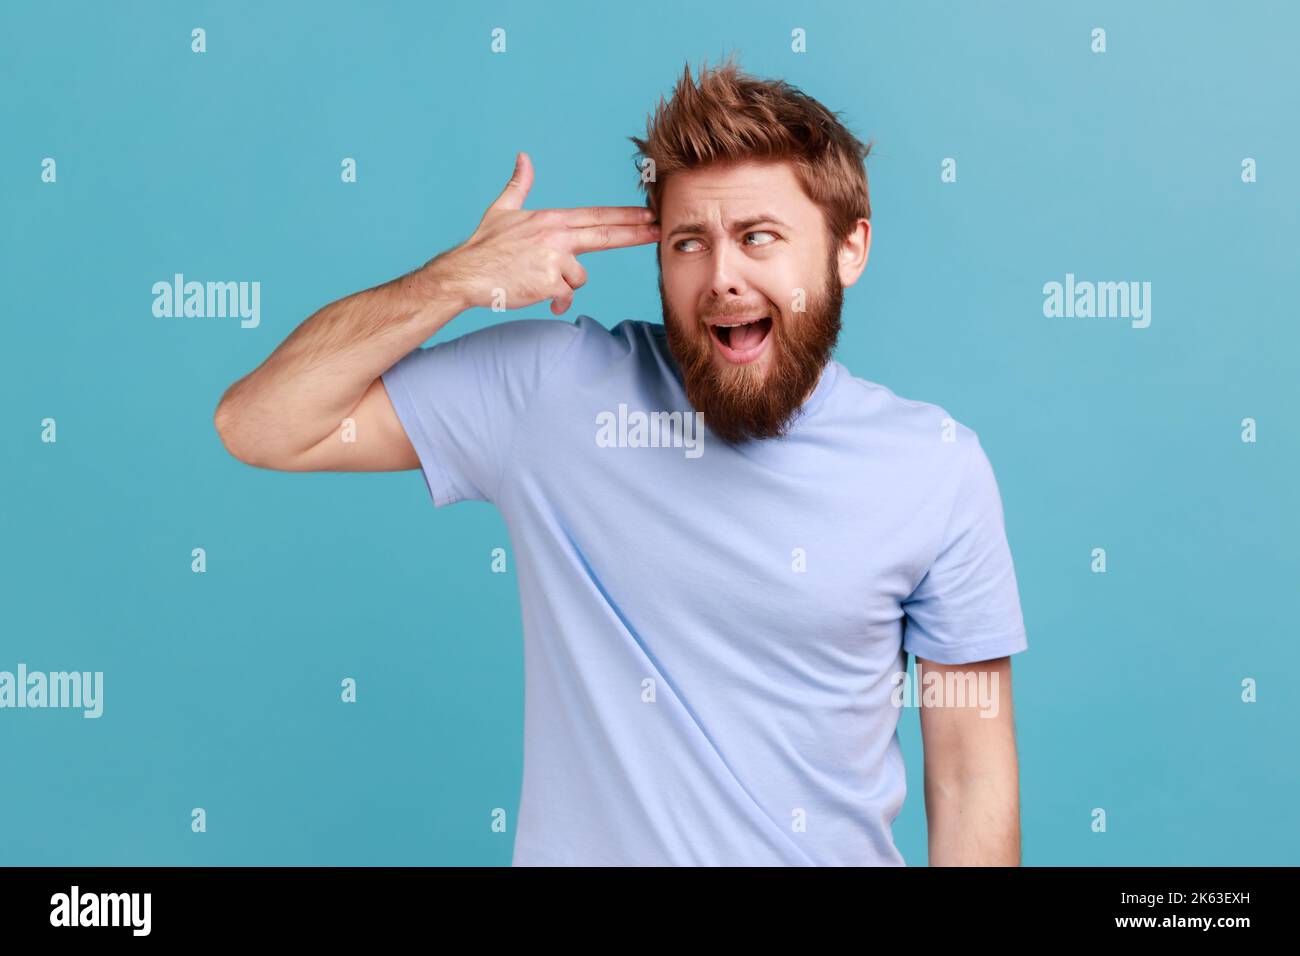 Depression, suicide gesture. Portrait of crazy bearded man standing with finger gun pointed to head, shooting himself with hand pistol. Indoor studio shot isolated on blue background. Stock Photo